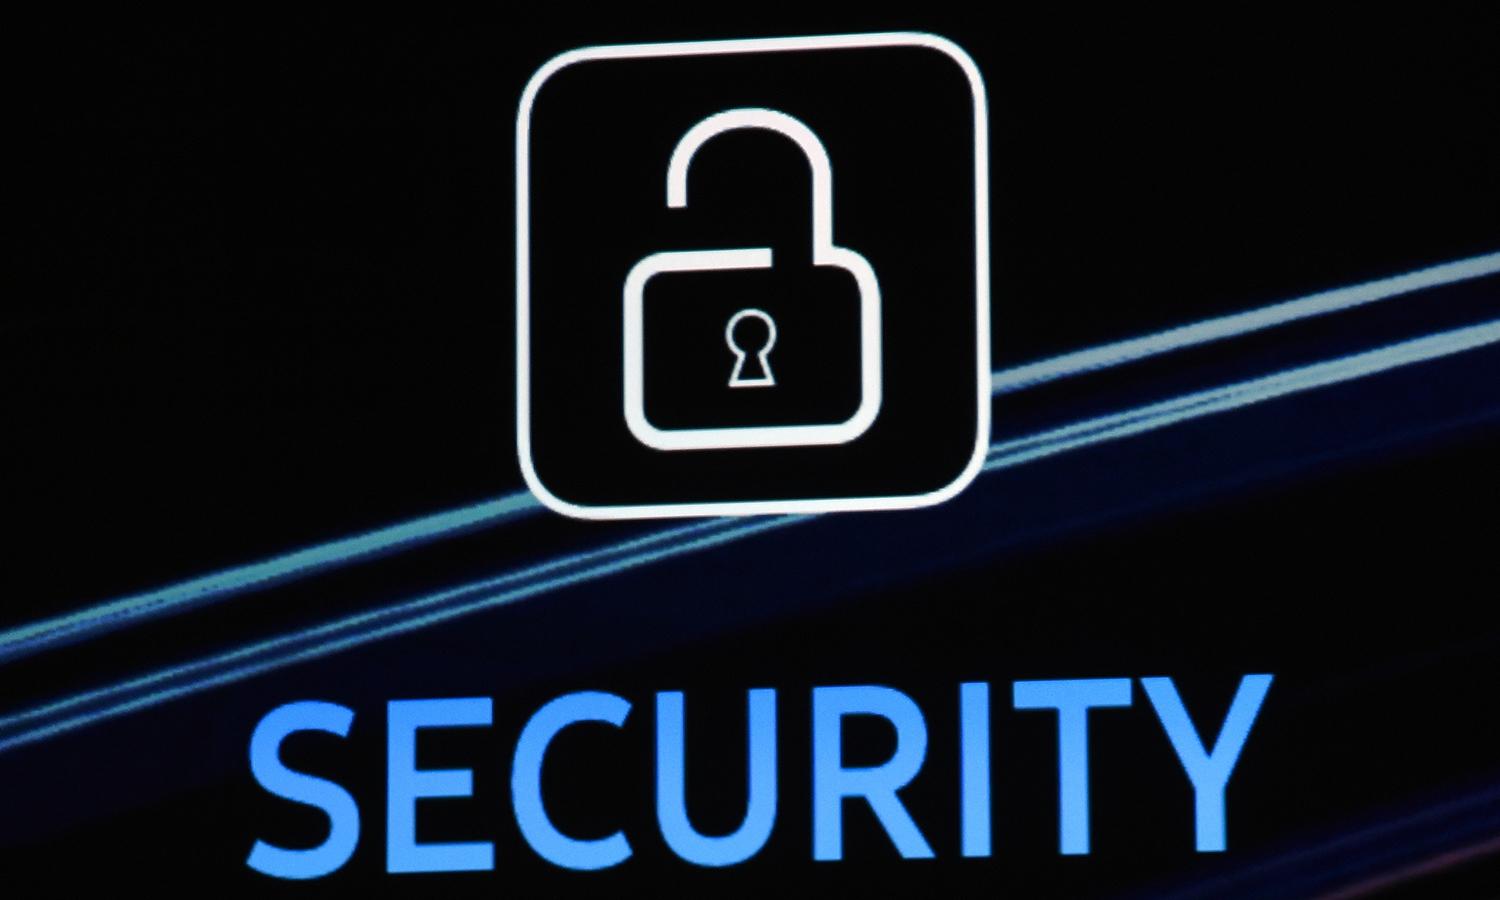 A security logo is shown on screen